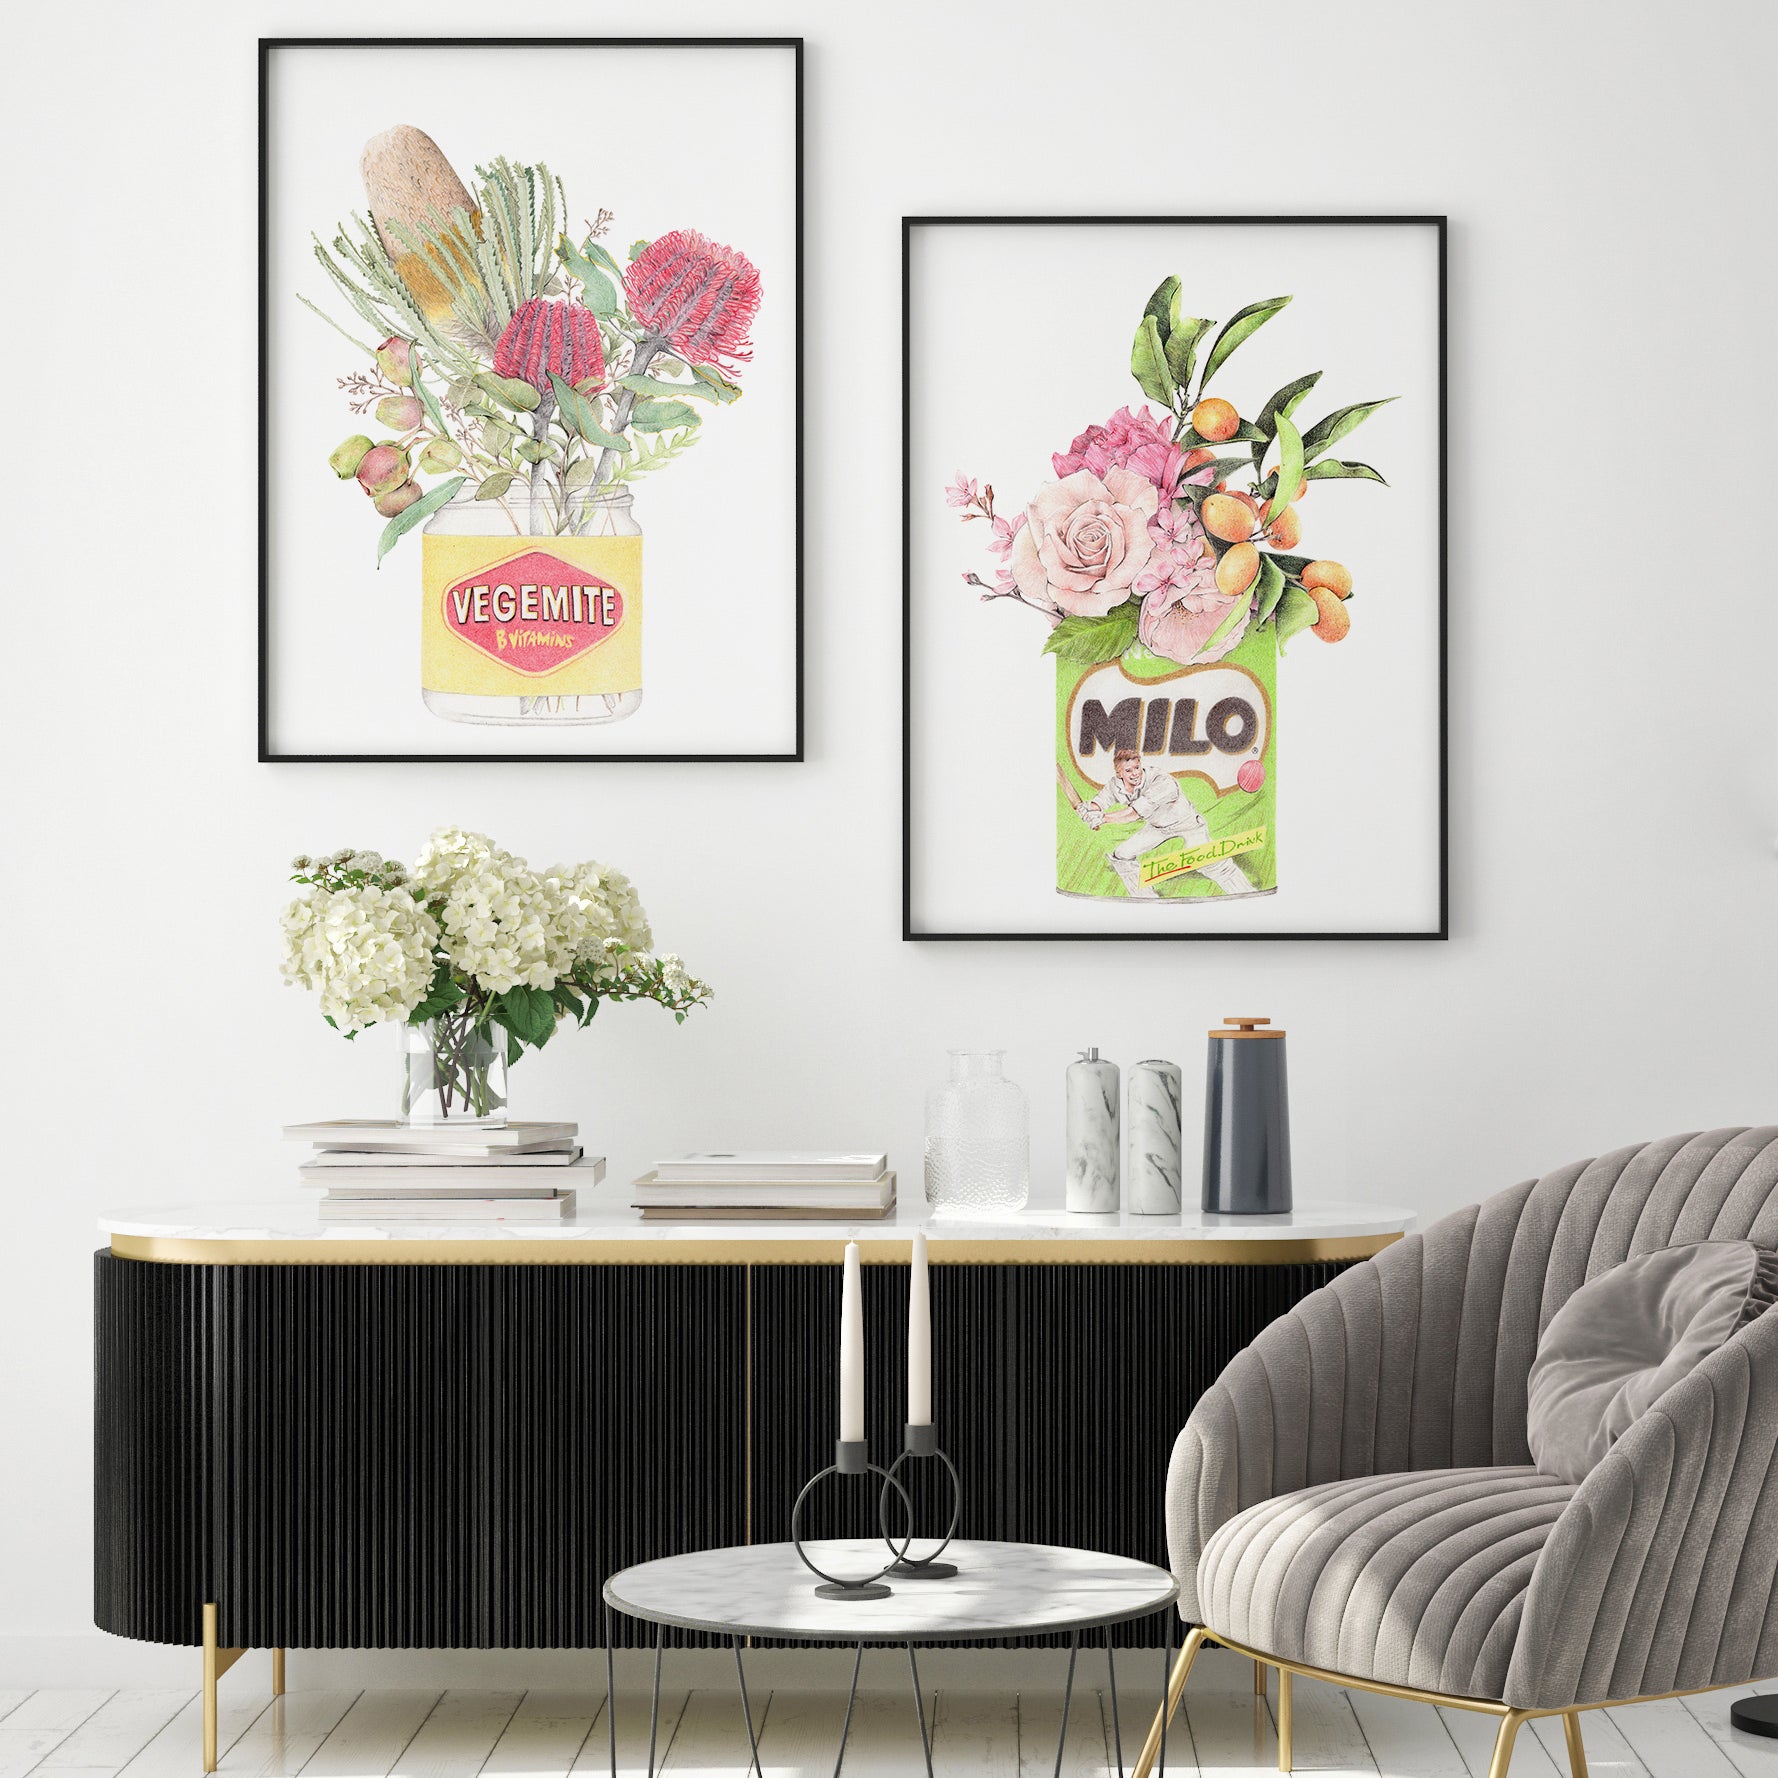 Set of 2 Wall Art with Vegemite and Milo